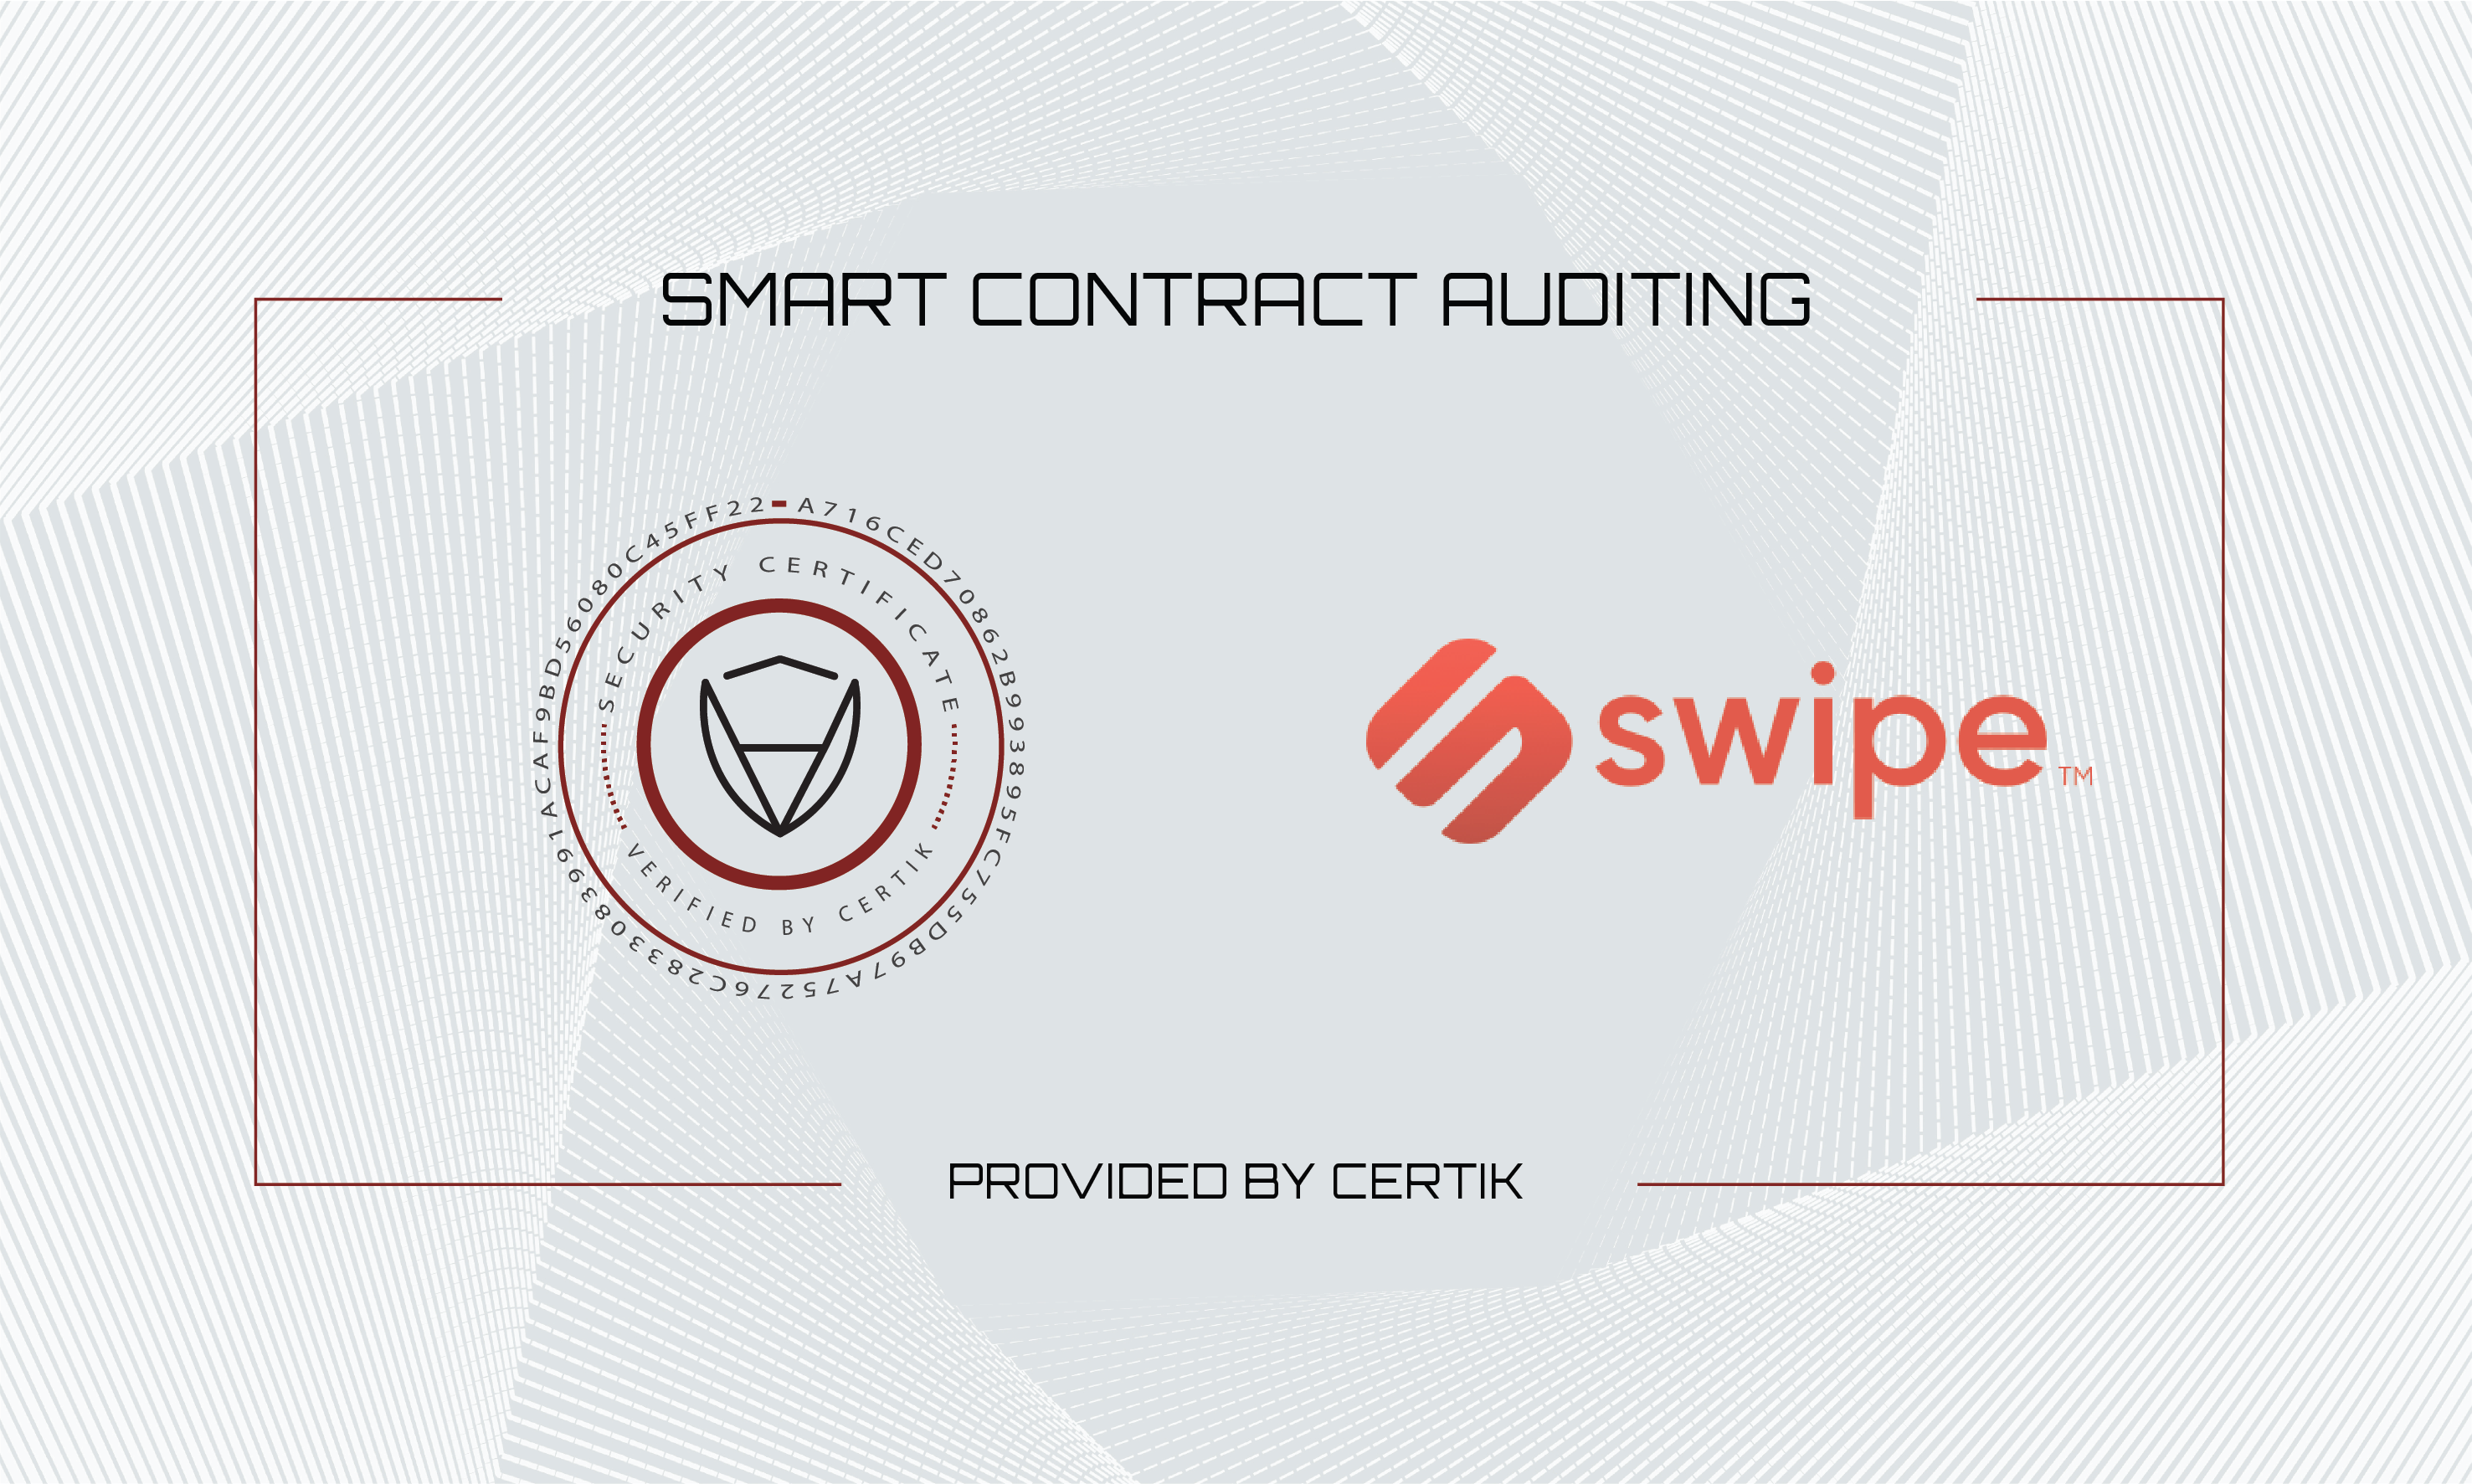 CertiK Has Completed Swipe’s SXP and Time-Lock Smart Contract Audits